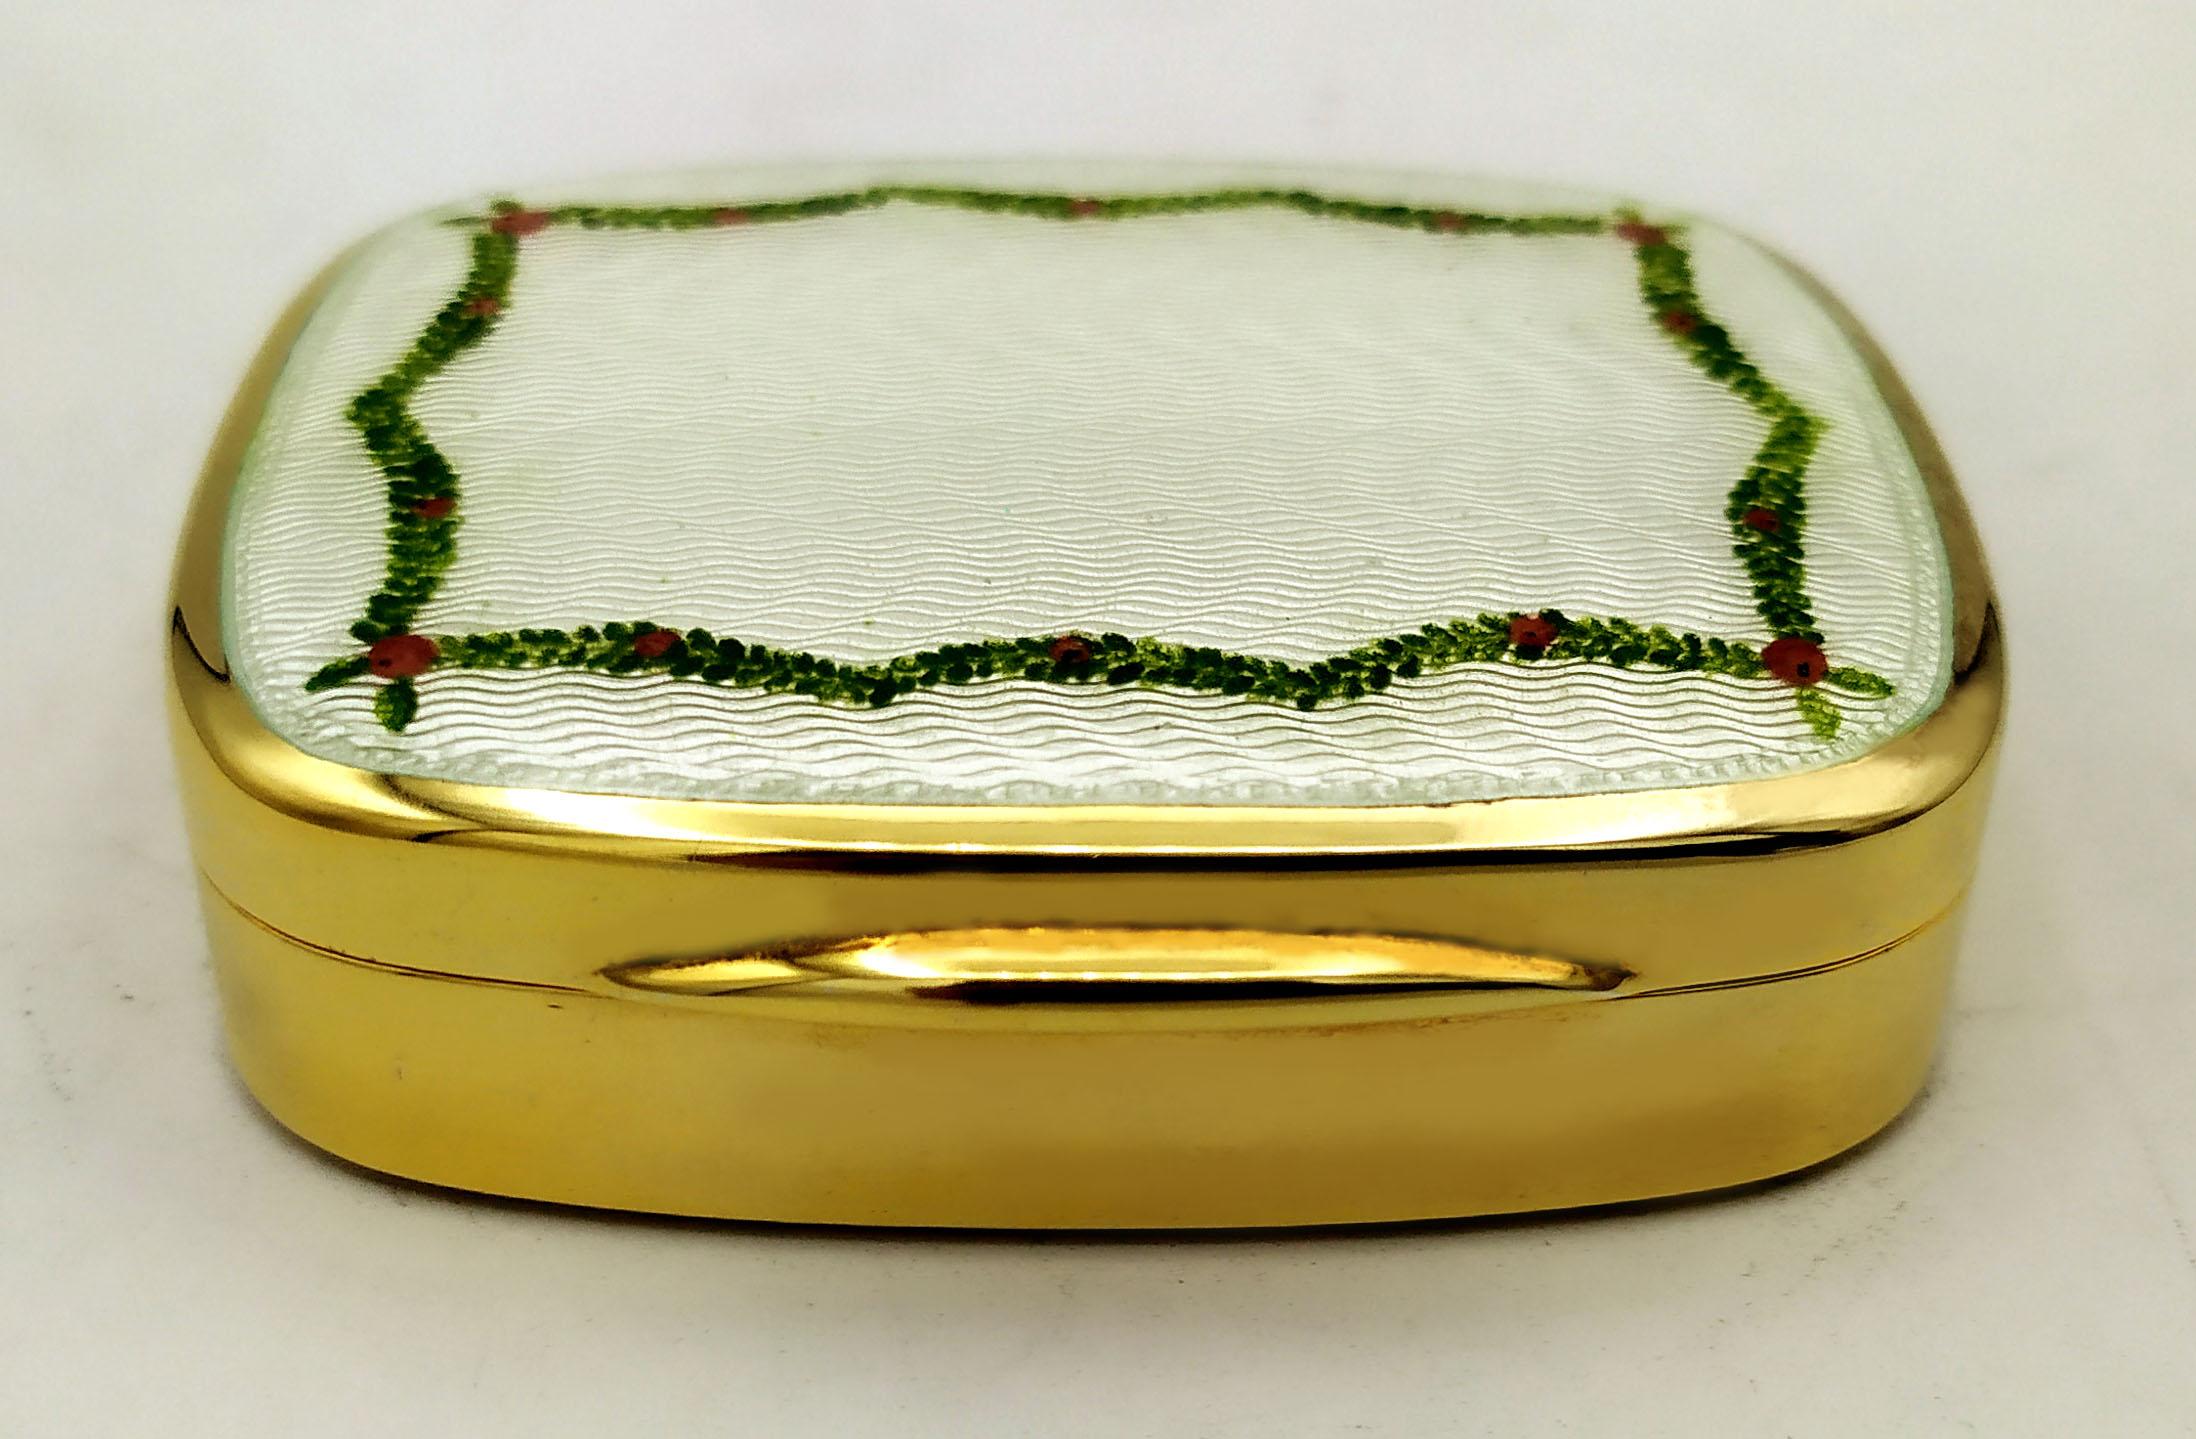 Rounded rectangular table snuffbox in 925/1000 sterling silver gold plated with translucent fired enamels on guillochè and hand-painted miniature of a floral garland. Art Nouveau style early 1900s. Measure cm. 5.8 x 7.2 x 1.8. Weight gr. 139.